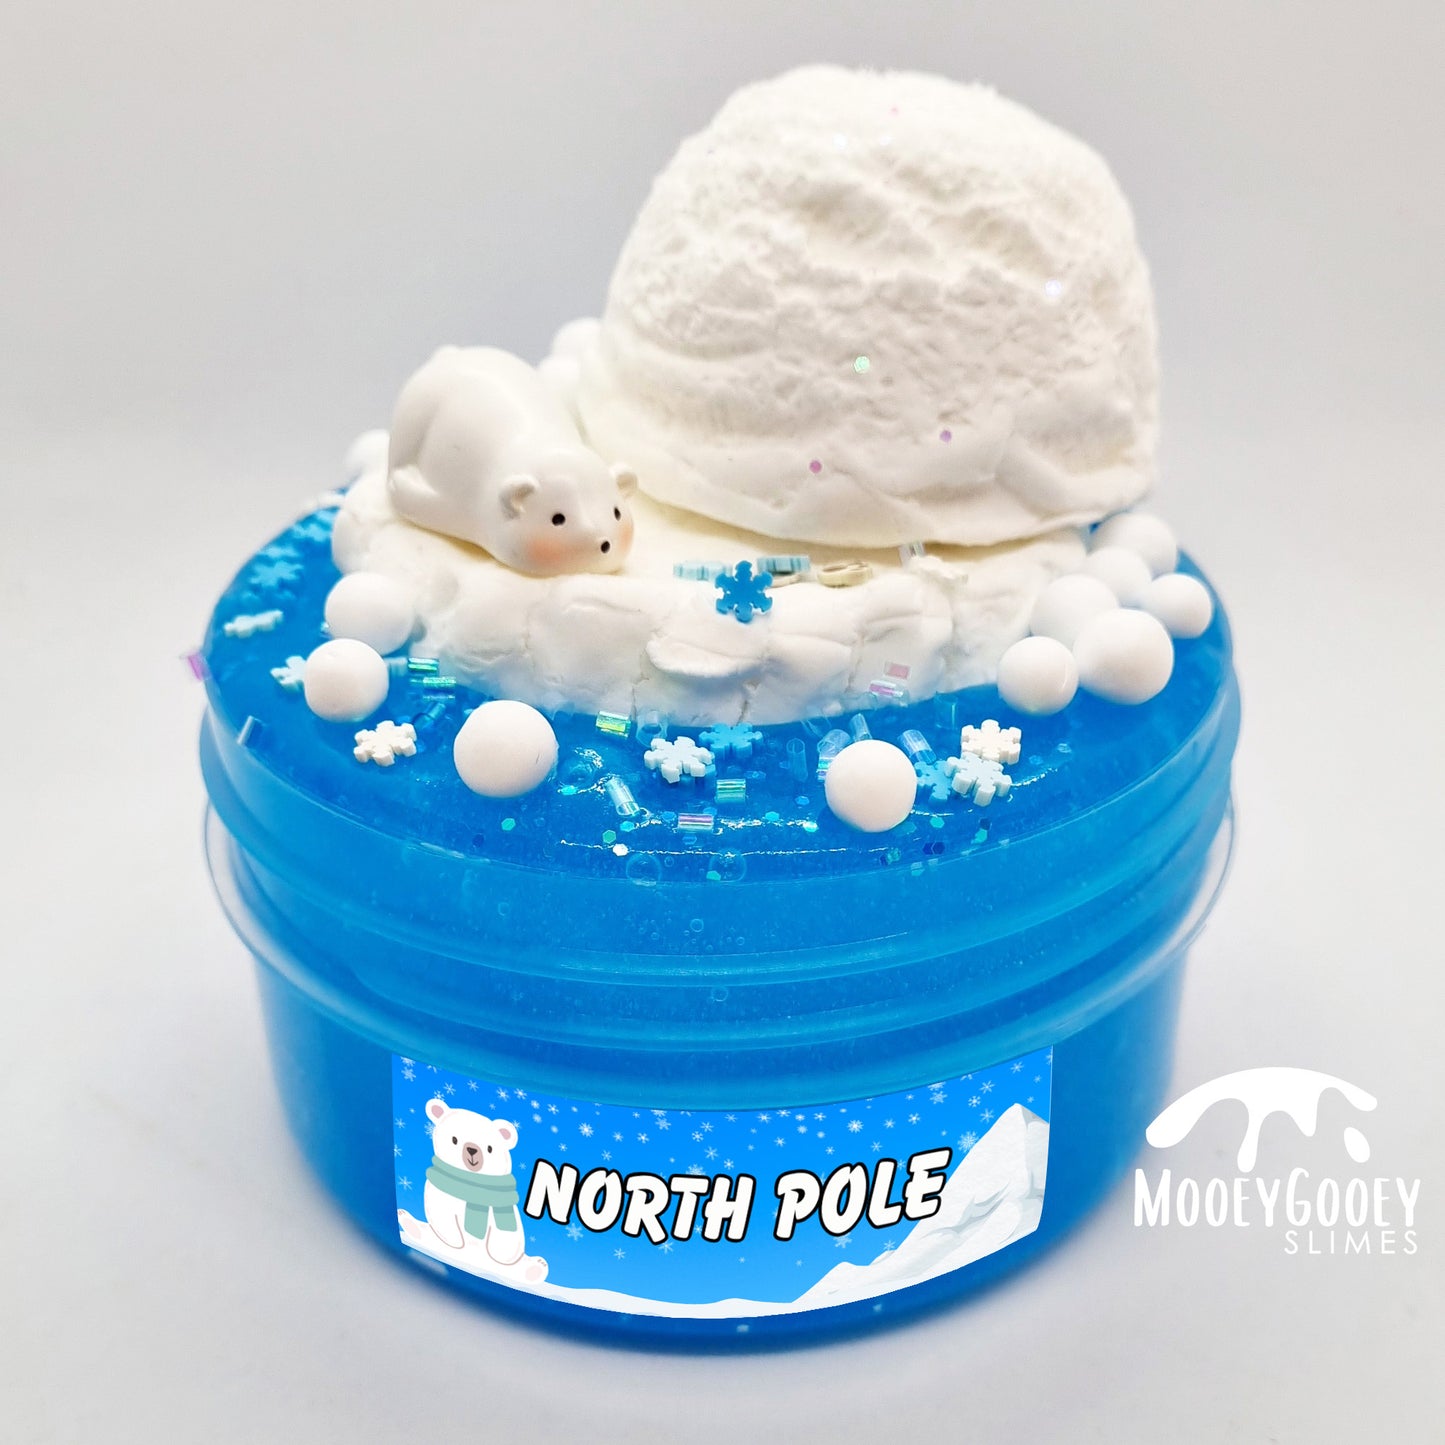 North Pole - Jelly Slime